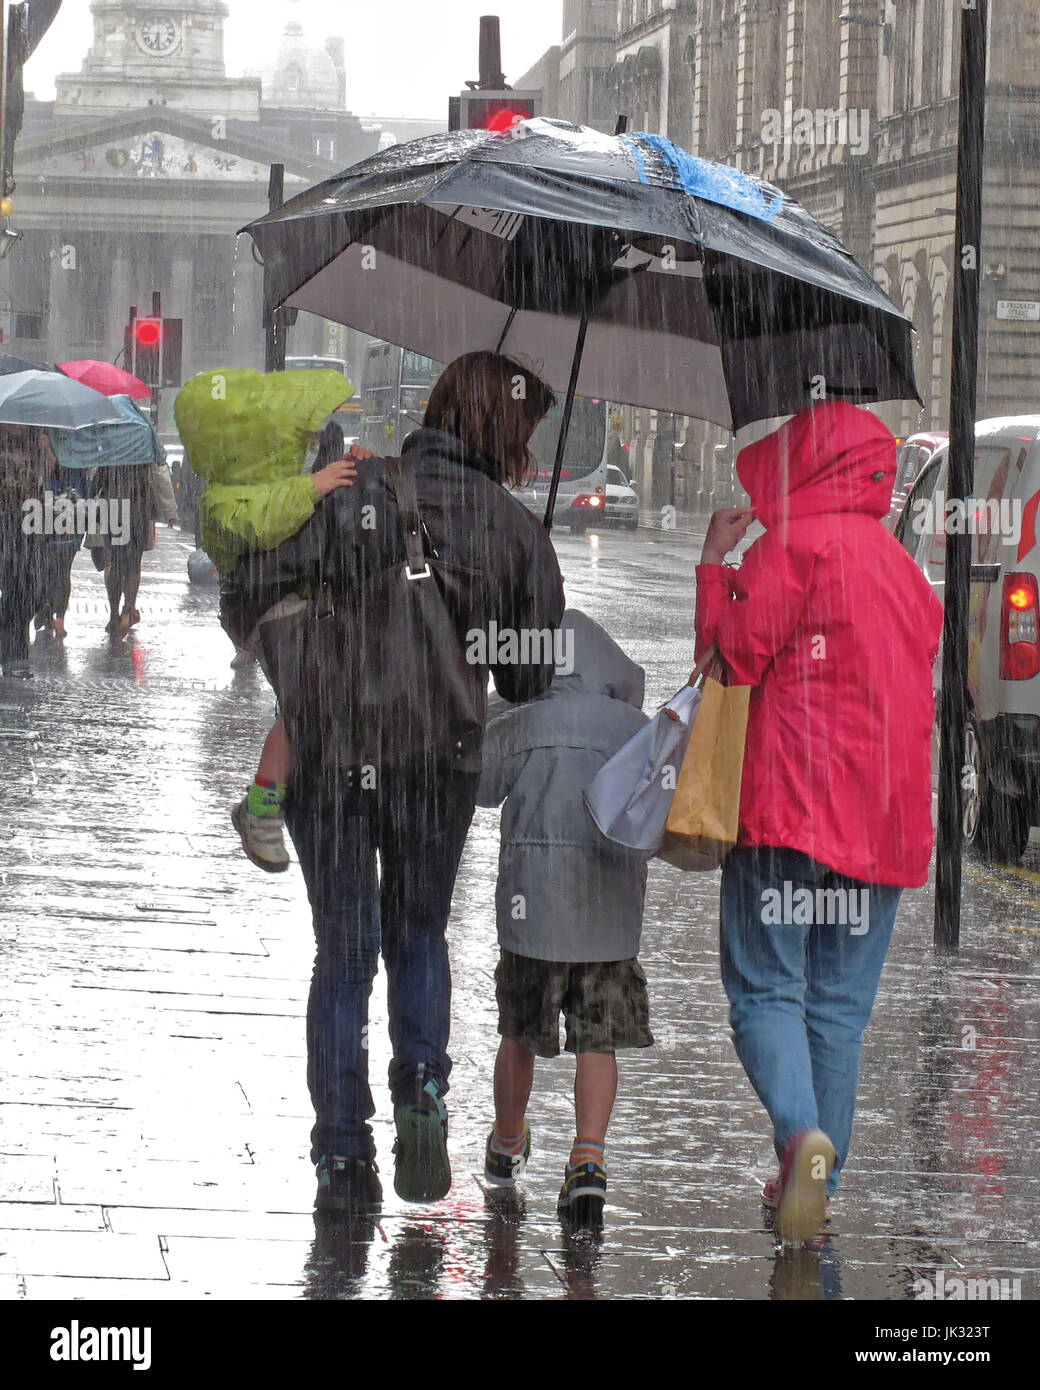 torrential rain lashing pouring down in Glasgow umbrella and hoods family carrying child Stock Photo